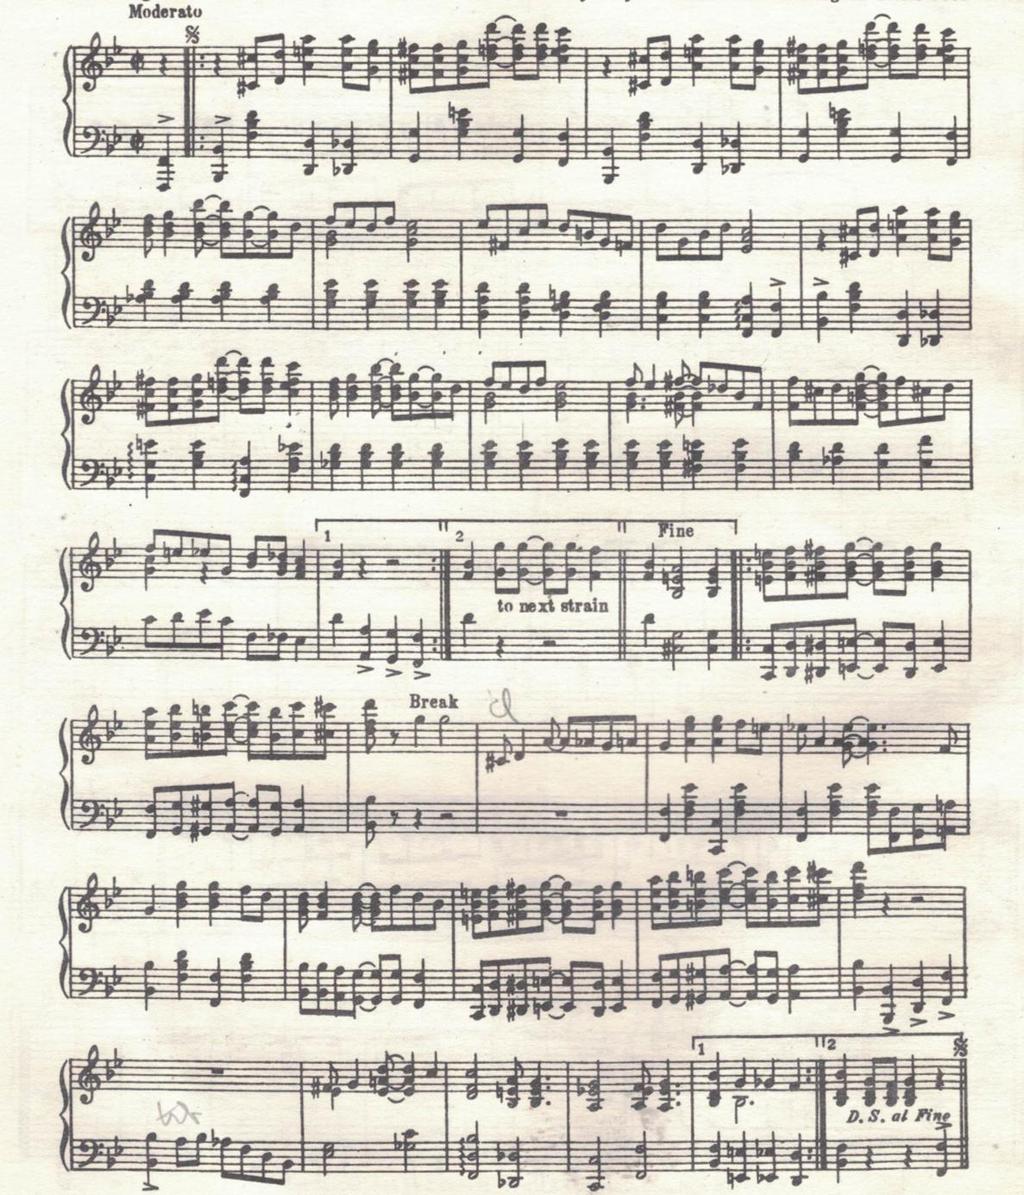 Chicago Breakdown - 1925 Written in 8 bar phrases at Section A, section B contains jazz breaks leading to a D. S. that repeats section A to a 3 rd ending which goes to the trio and modulates from Bb to Eb.